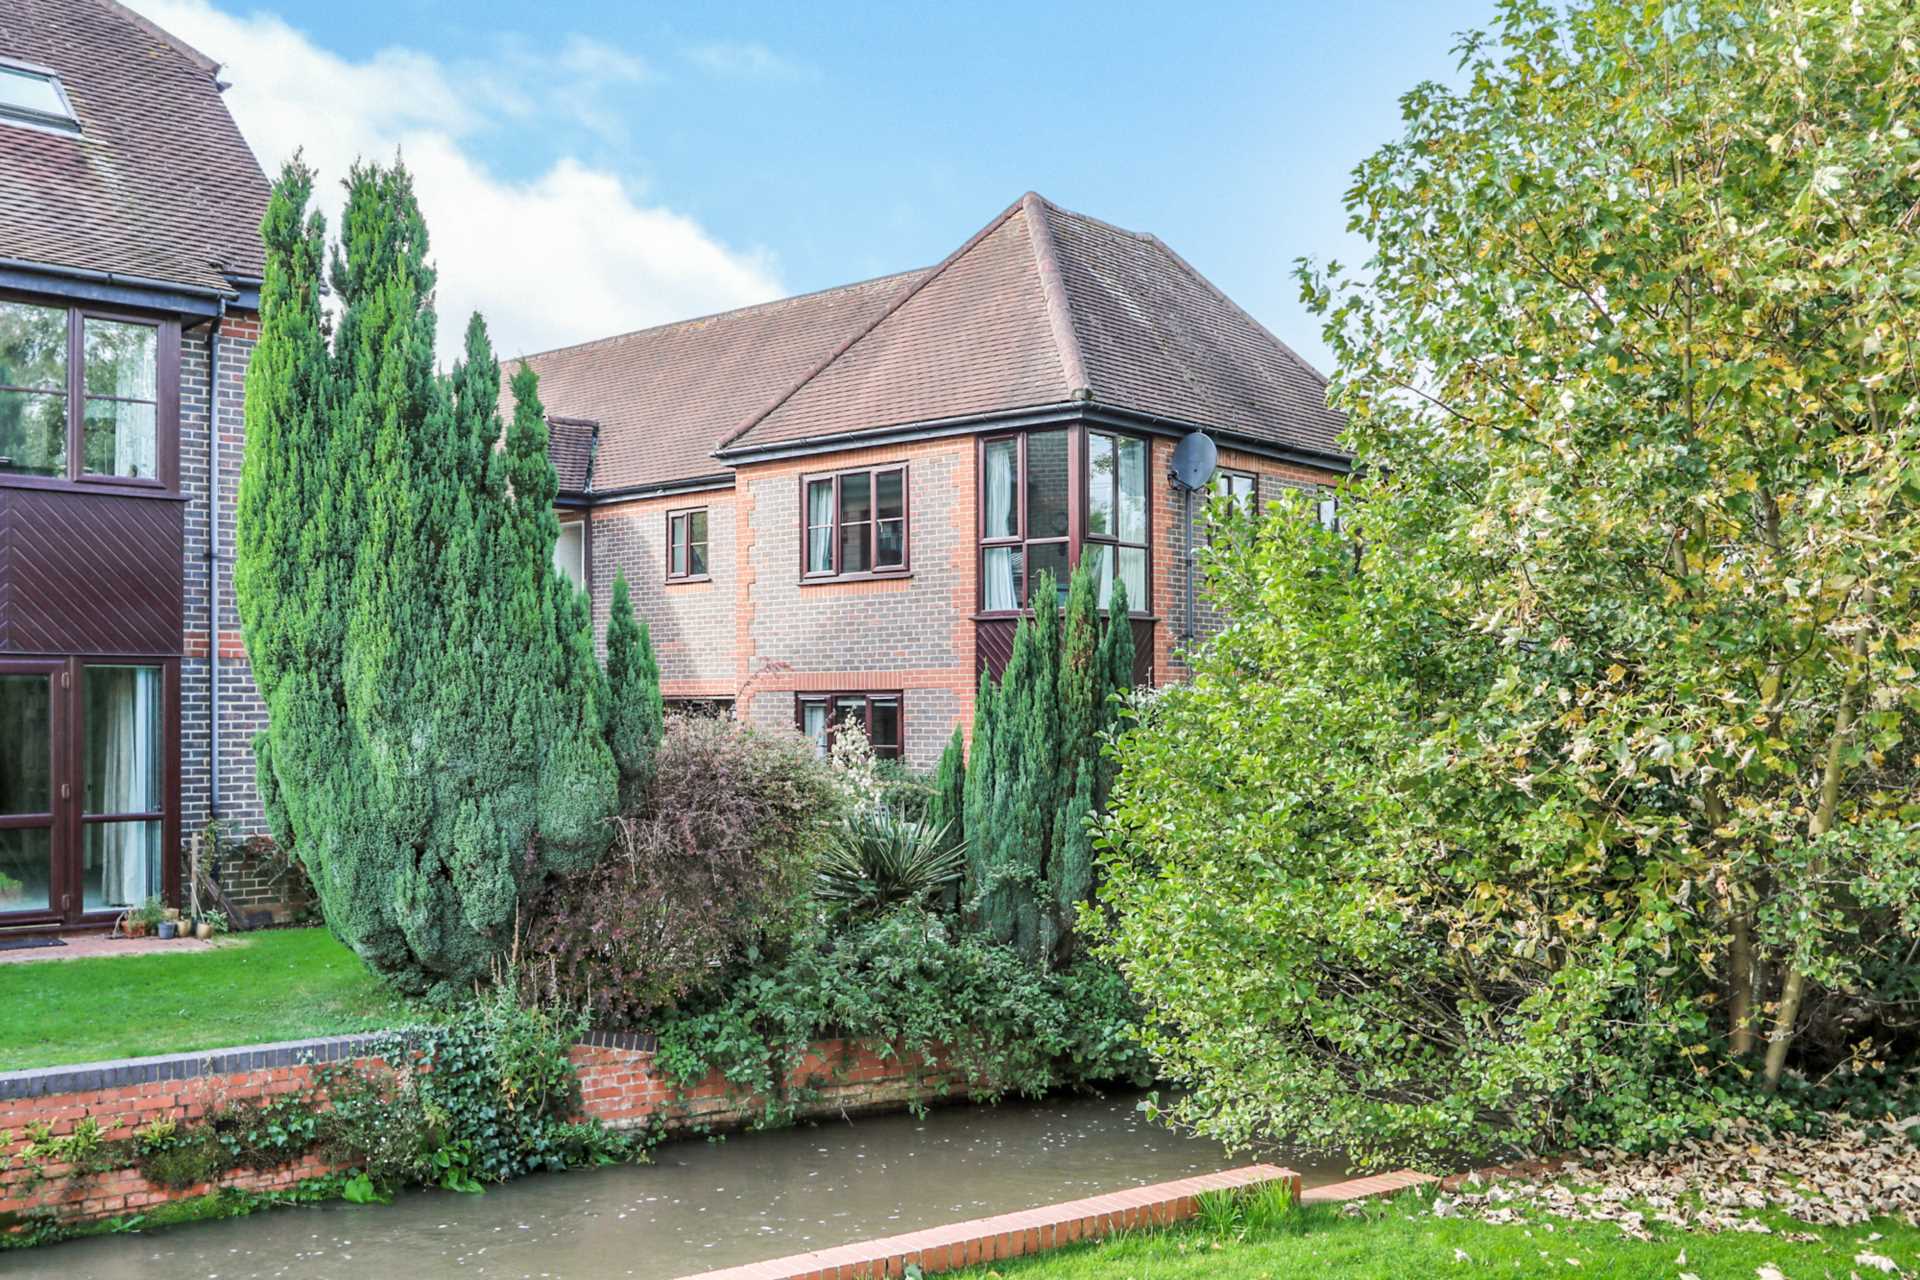 Willows Court, Pangbourne, Image 12